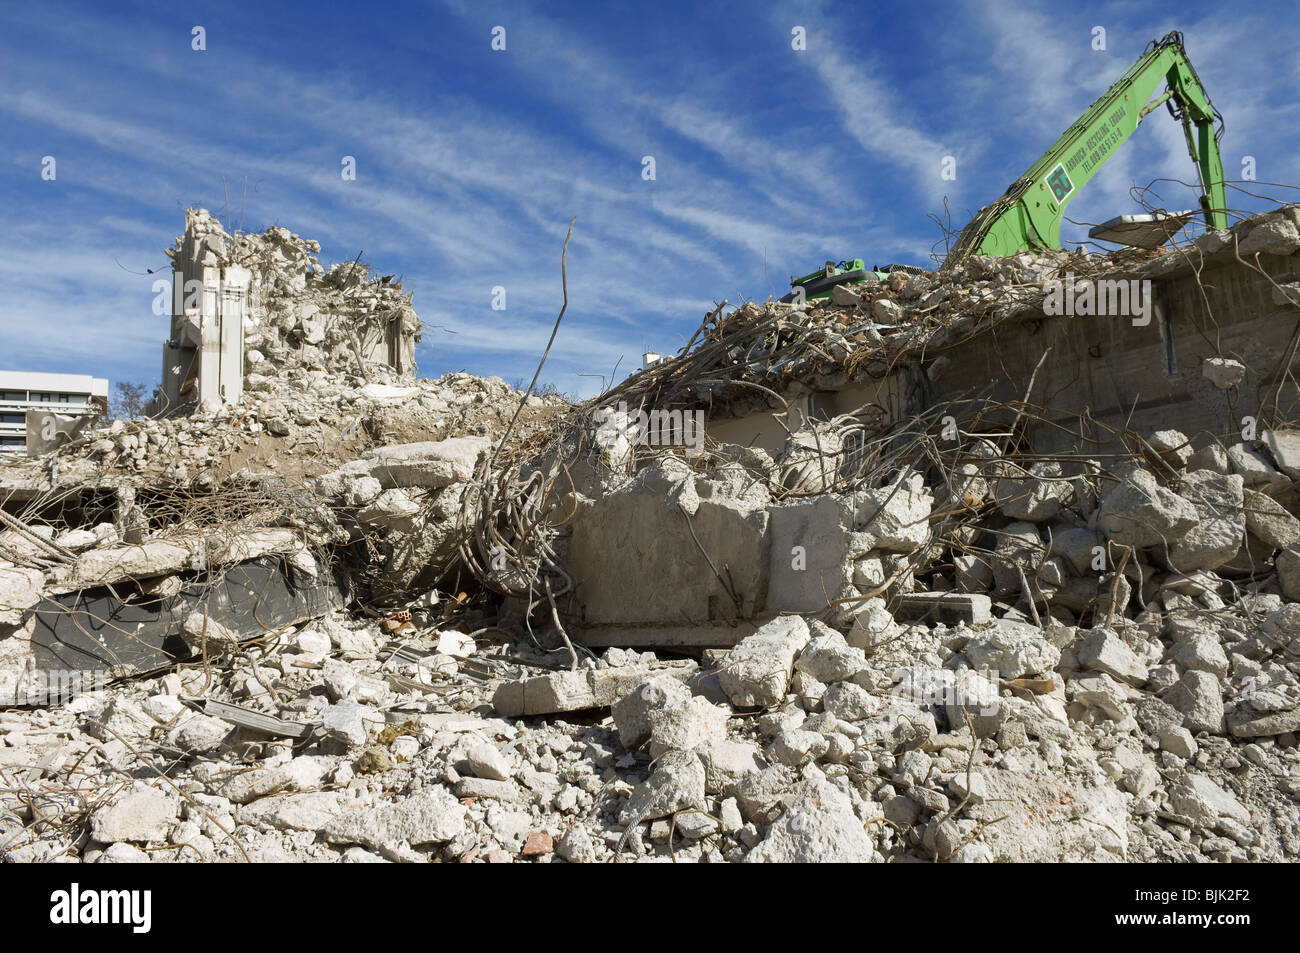 Ruins from the demolition of a post office building, Angererstrasse 9, economic crisis, Munich, Bavaria, Germany, Europe Stock Photo